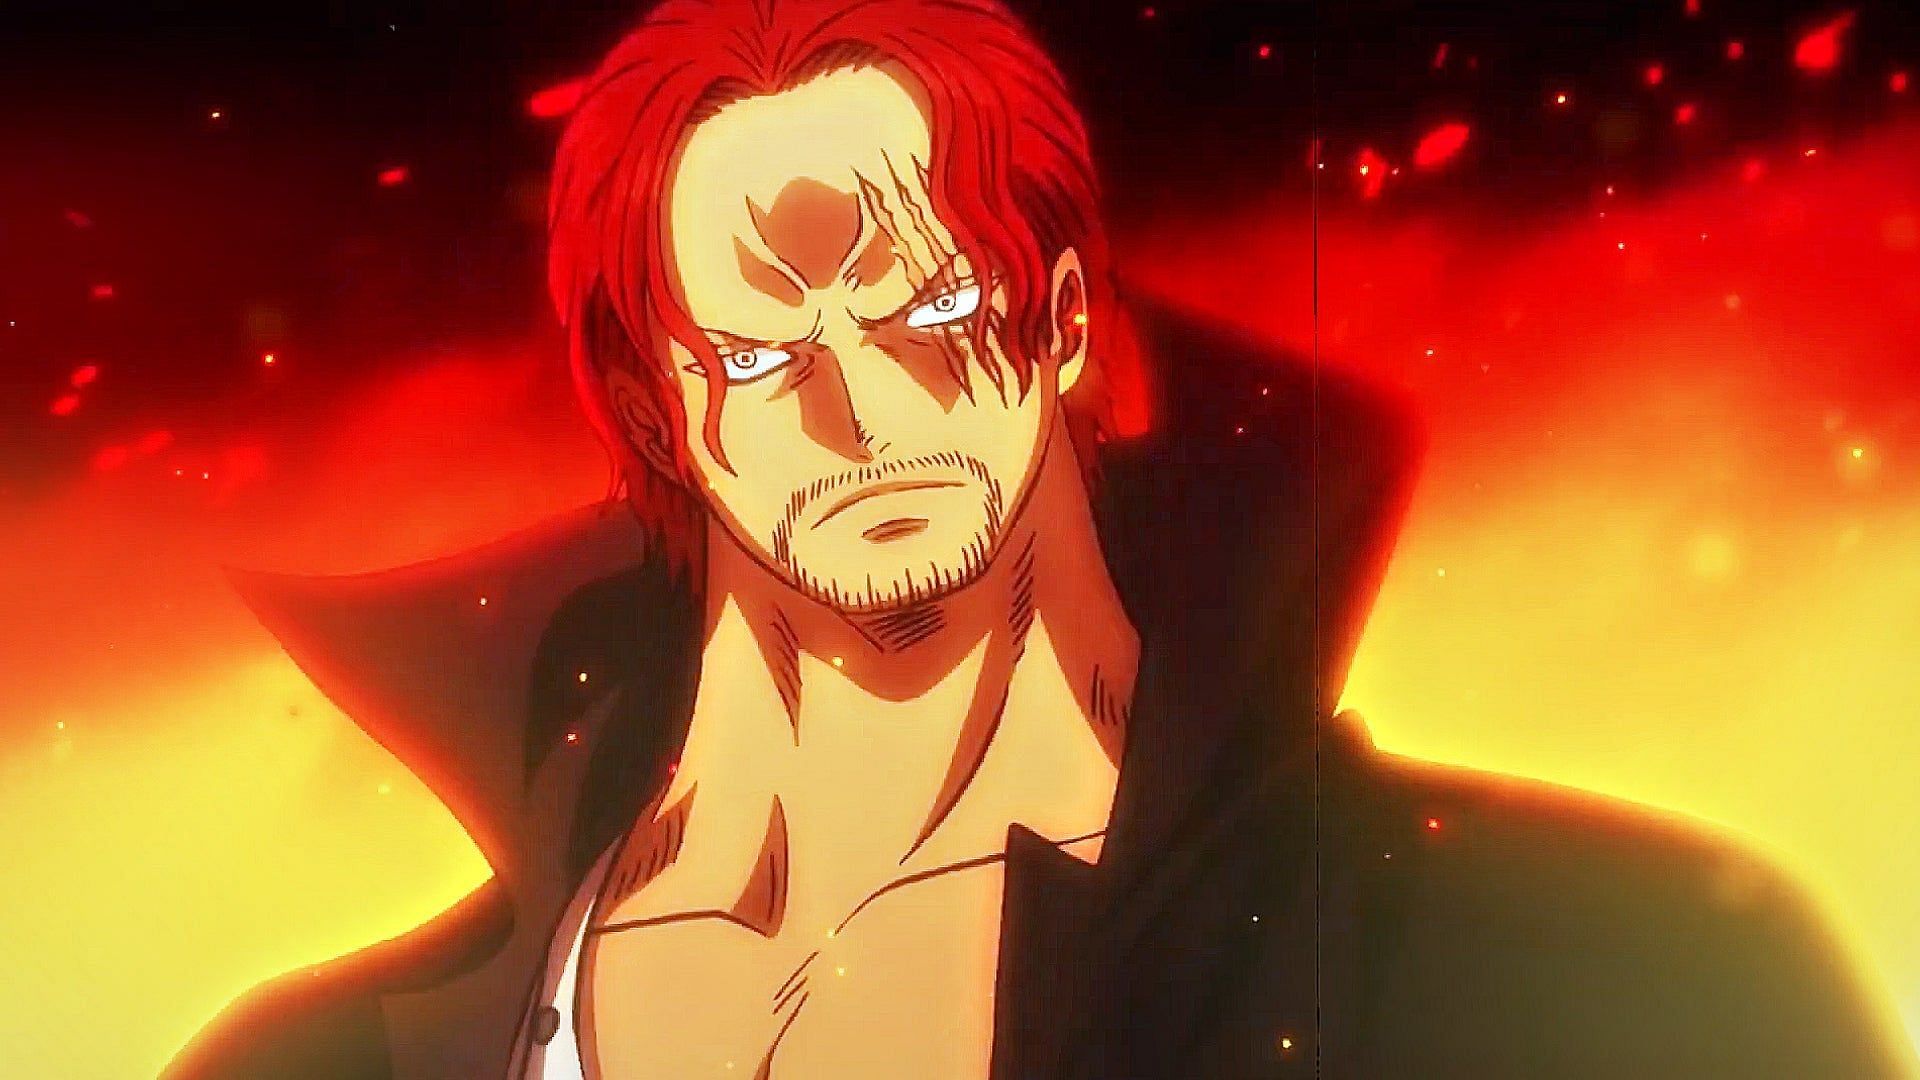 Shanks&#039; return is dominating social media discussions among fans following One Piece Chapter 1054&#039;s unofficial release (Image via Eiichiro Oda/Shueisha, Viz Media, One Piece)